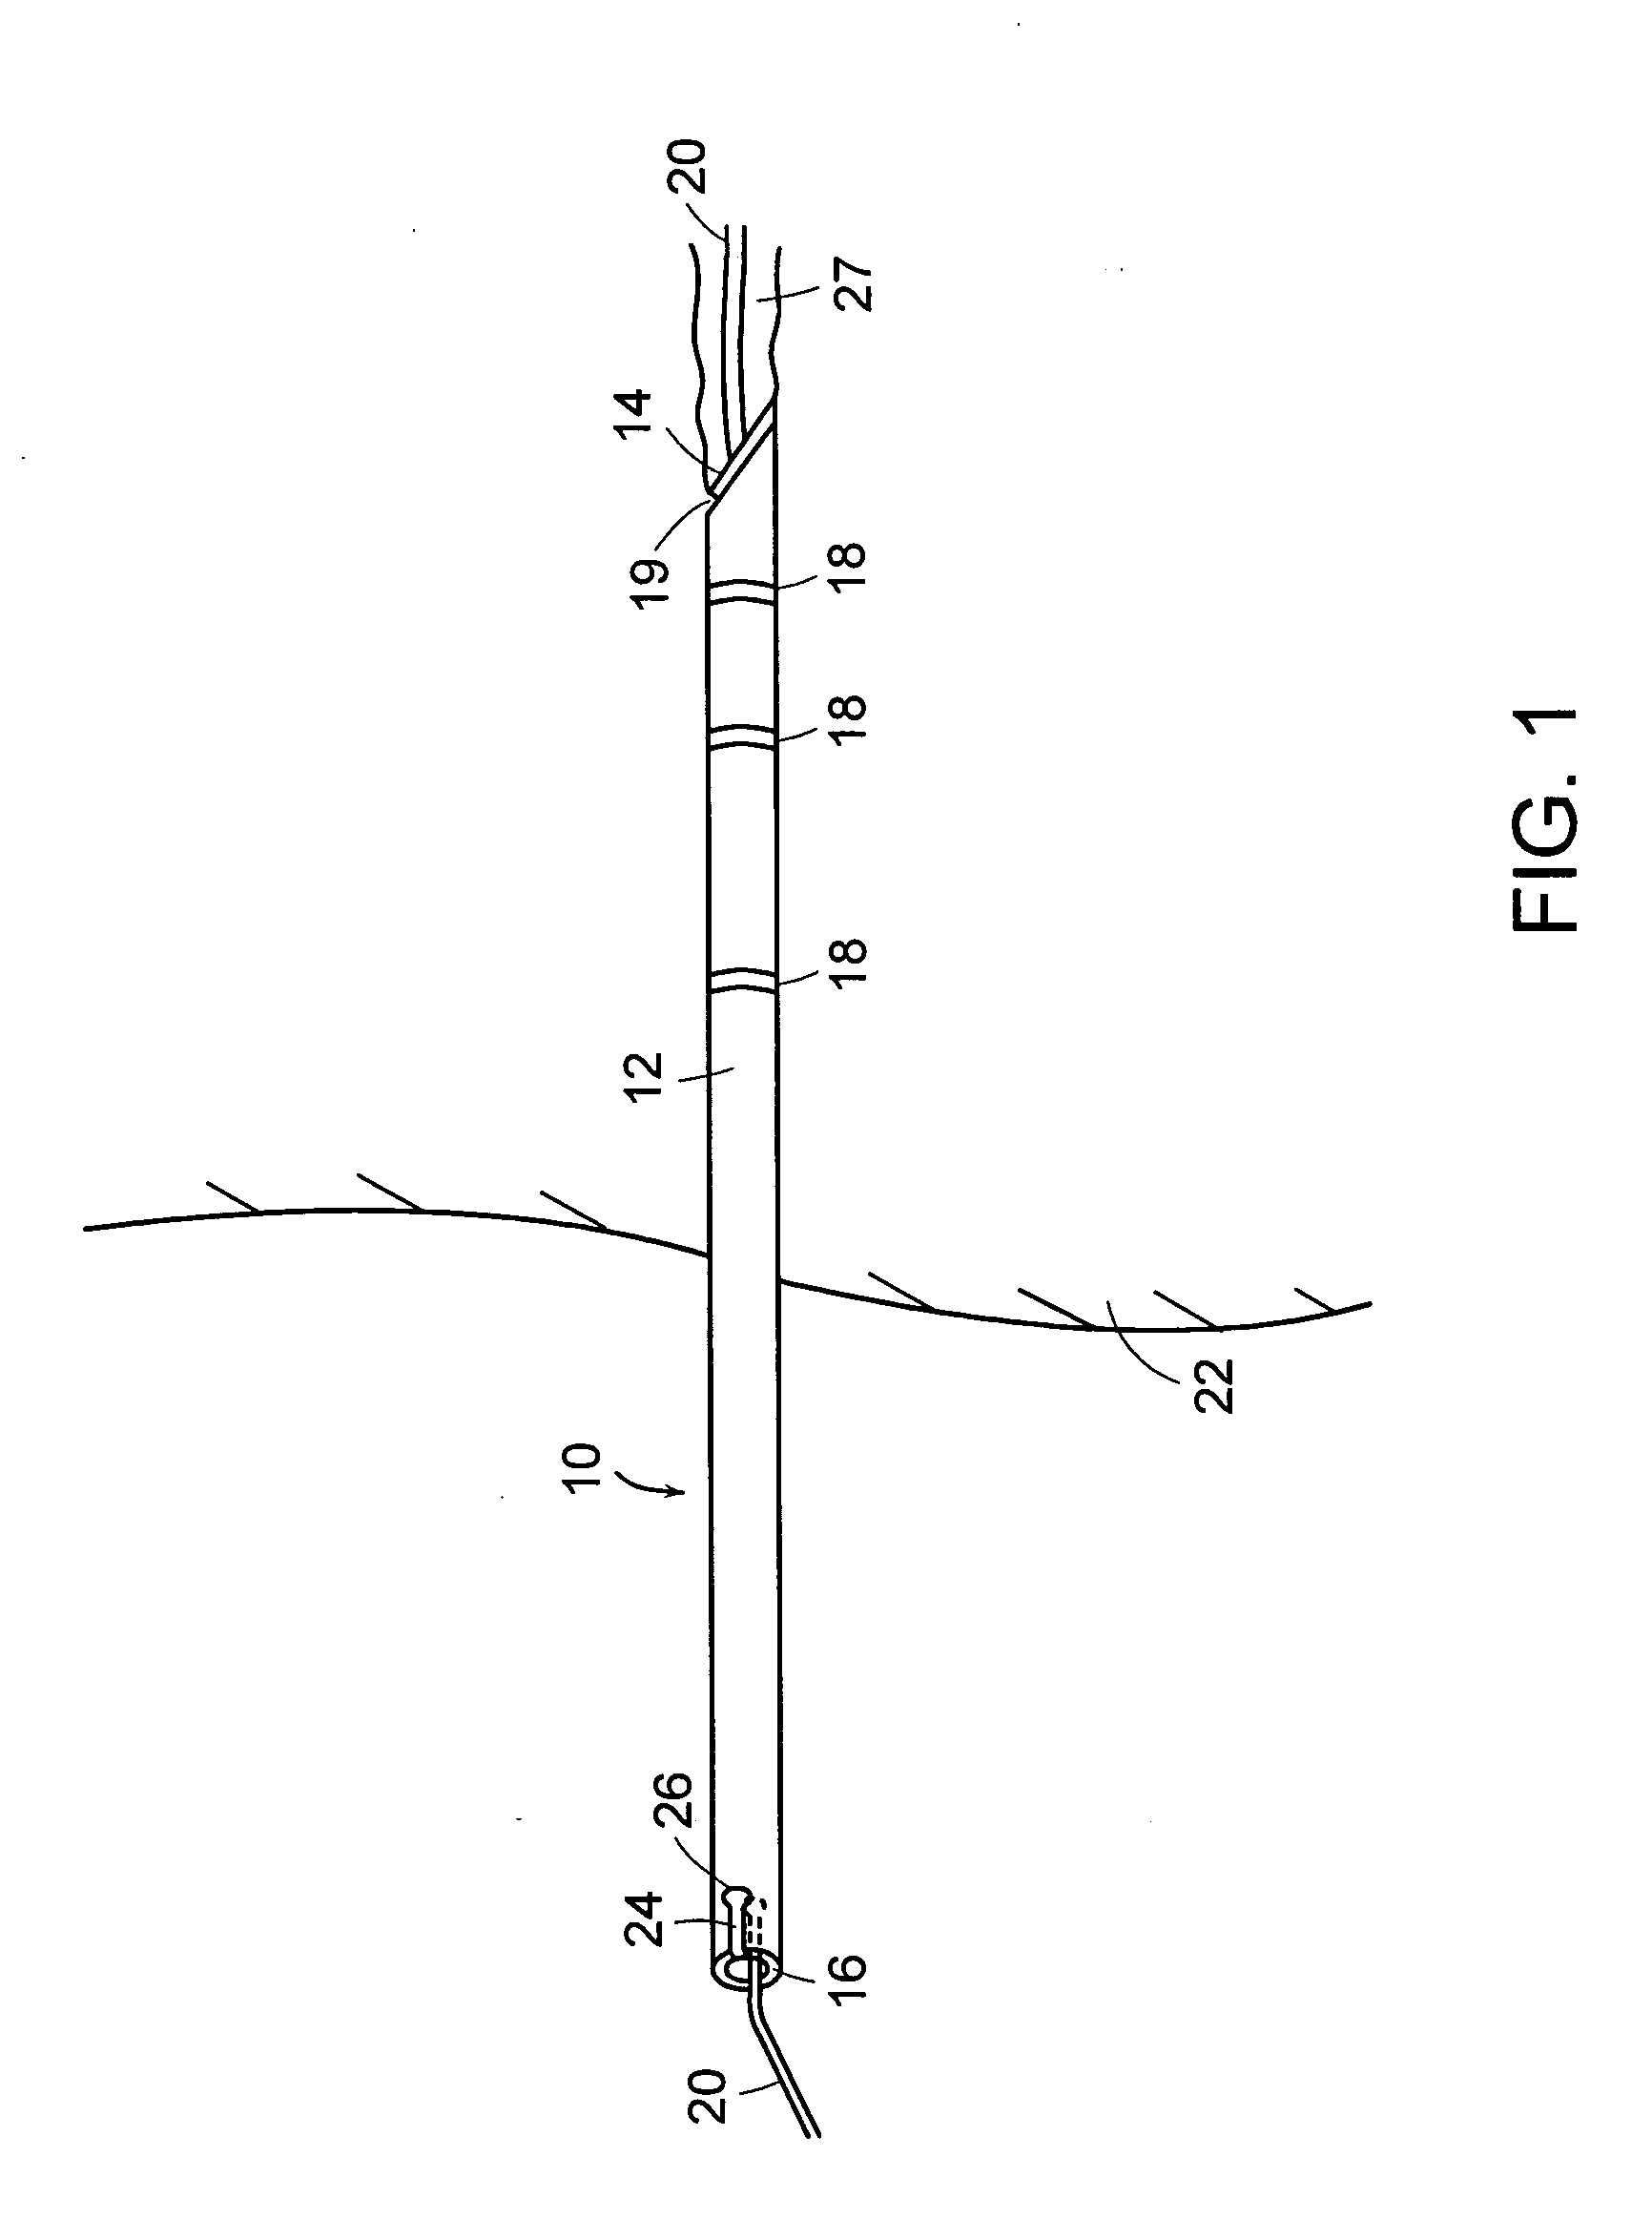 Apparatus and method for establishing access to the body